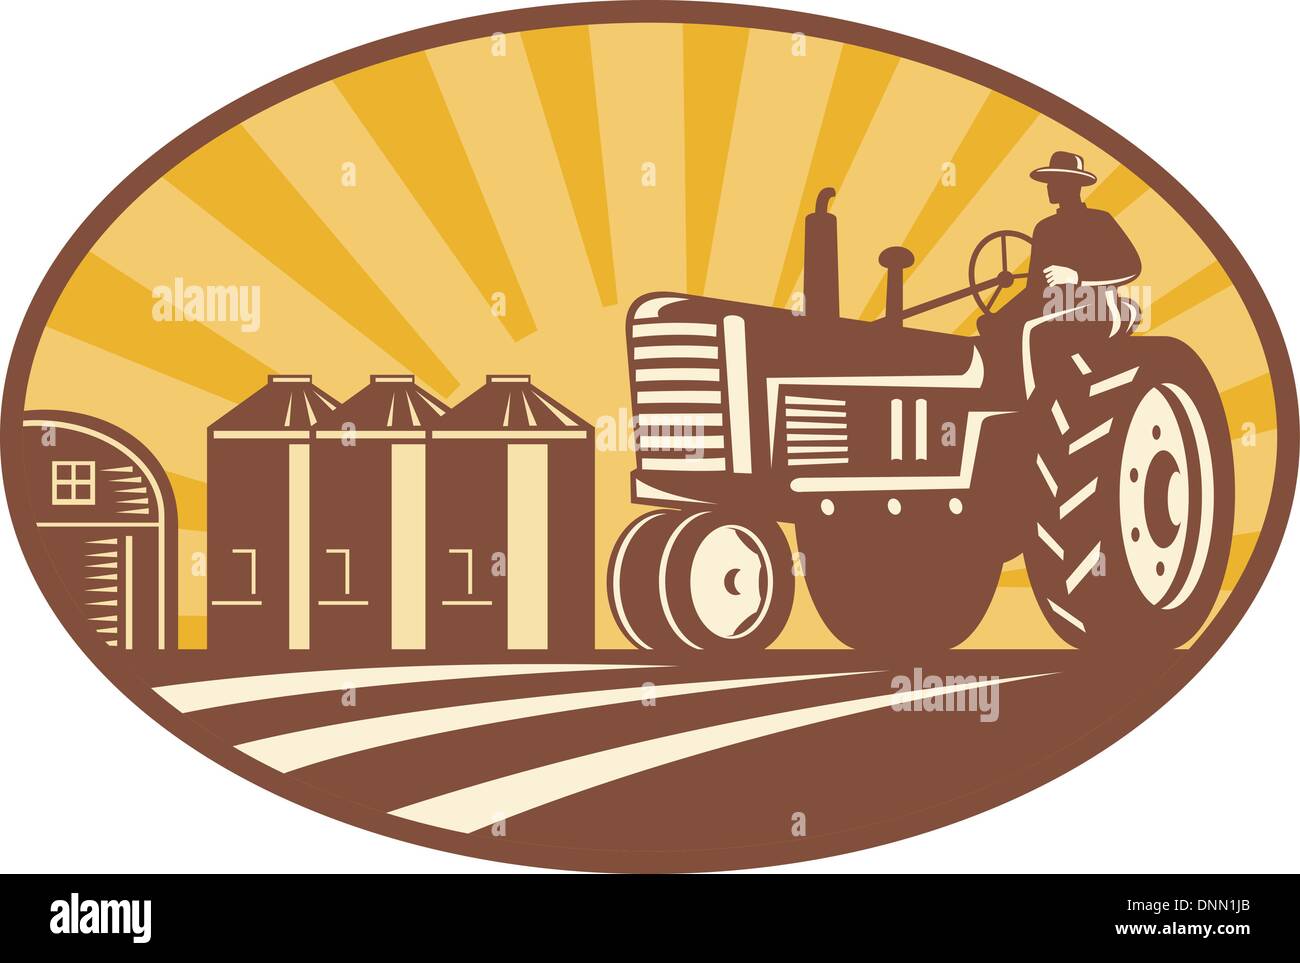 Illustration of a farmer driving a vintage farm tractor with barn and silos in background done in retro woodcut style. Stock Vector